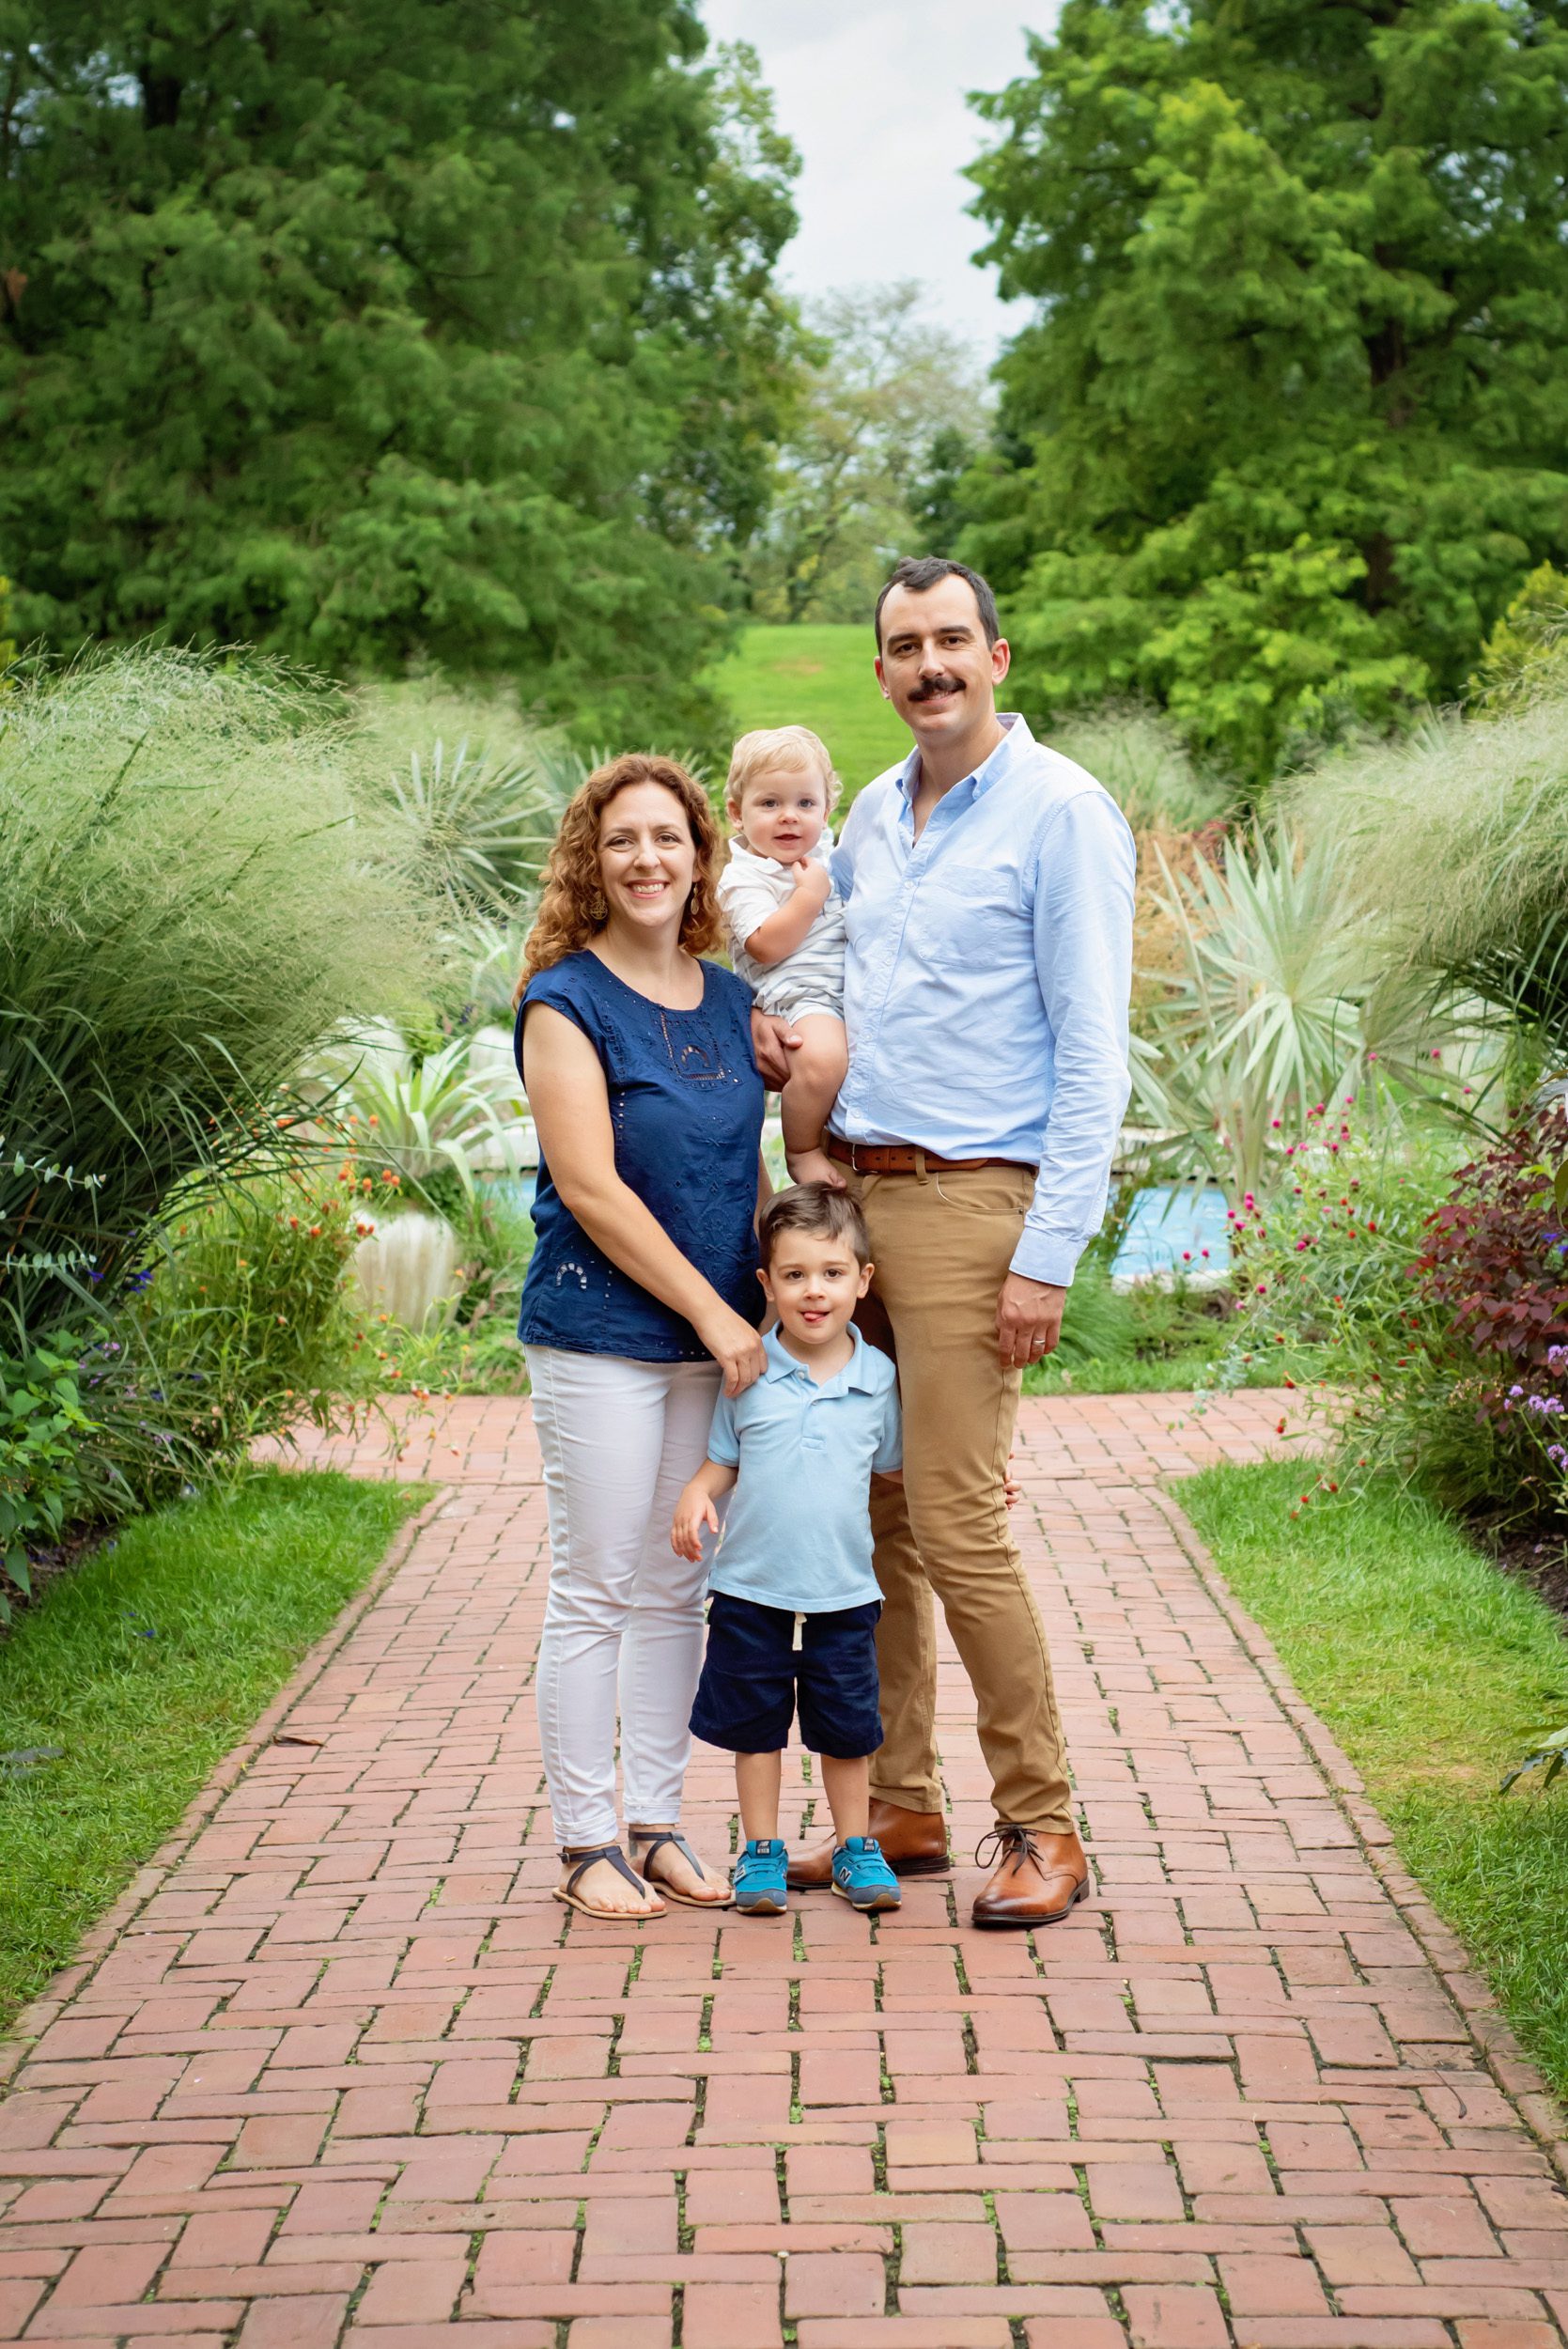 Two young boys and their parents standing on a brick path surrounded by flower gardens during a family photoshoot